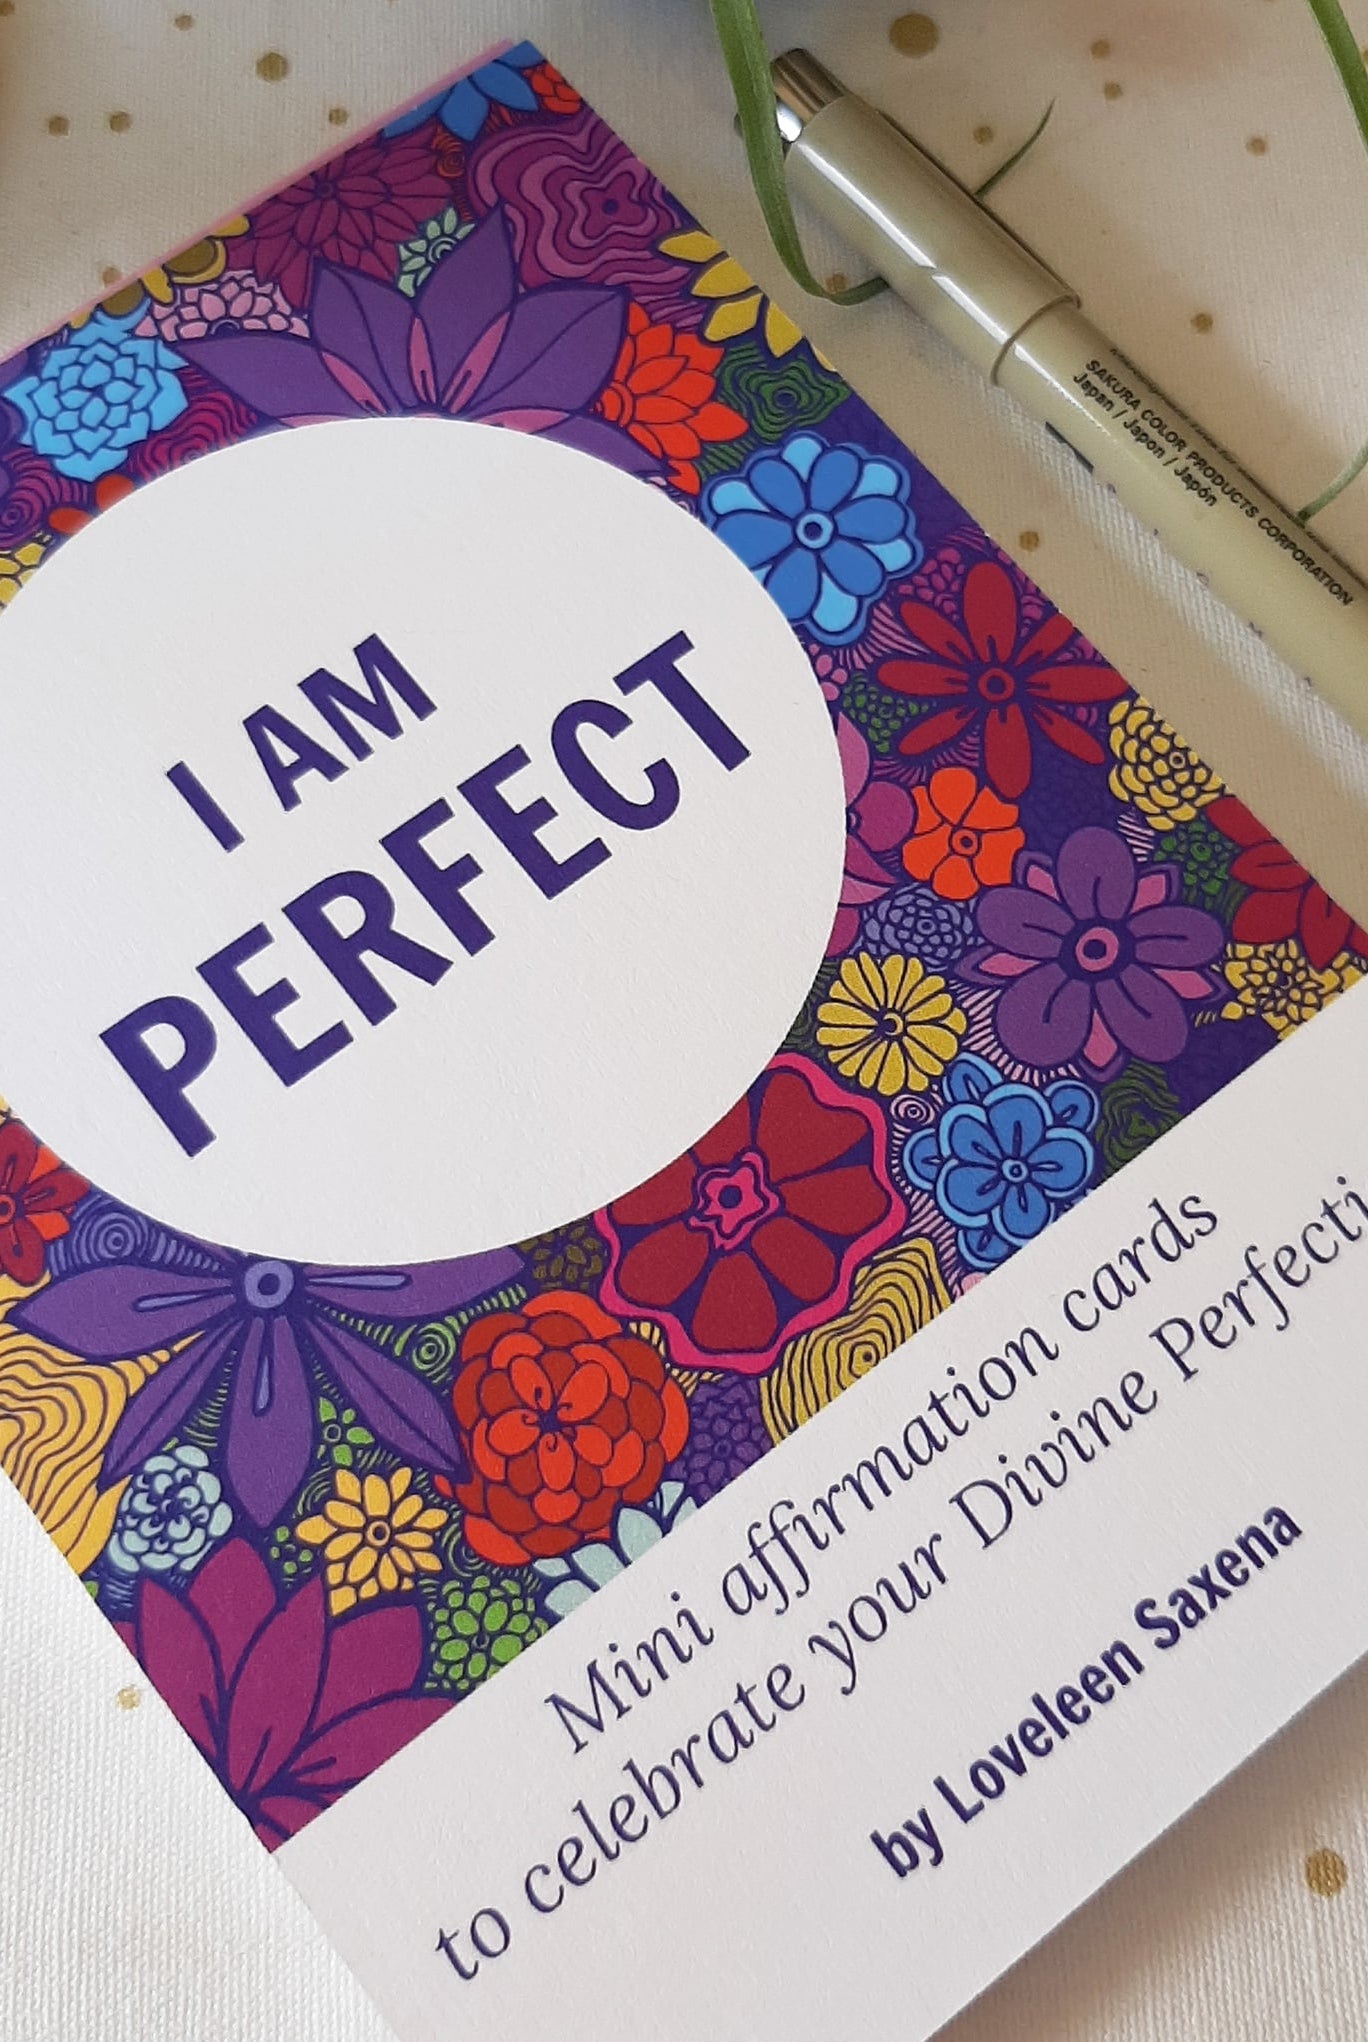 i am perfect affirmation cards and pen